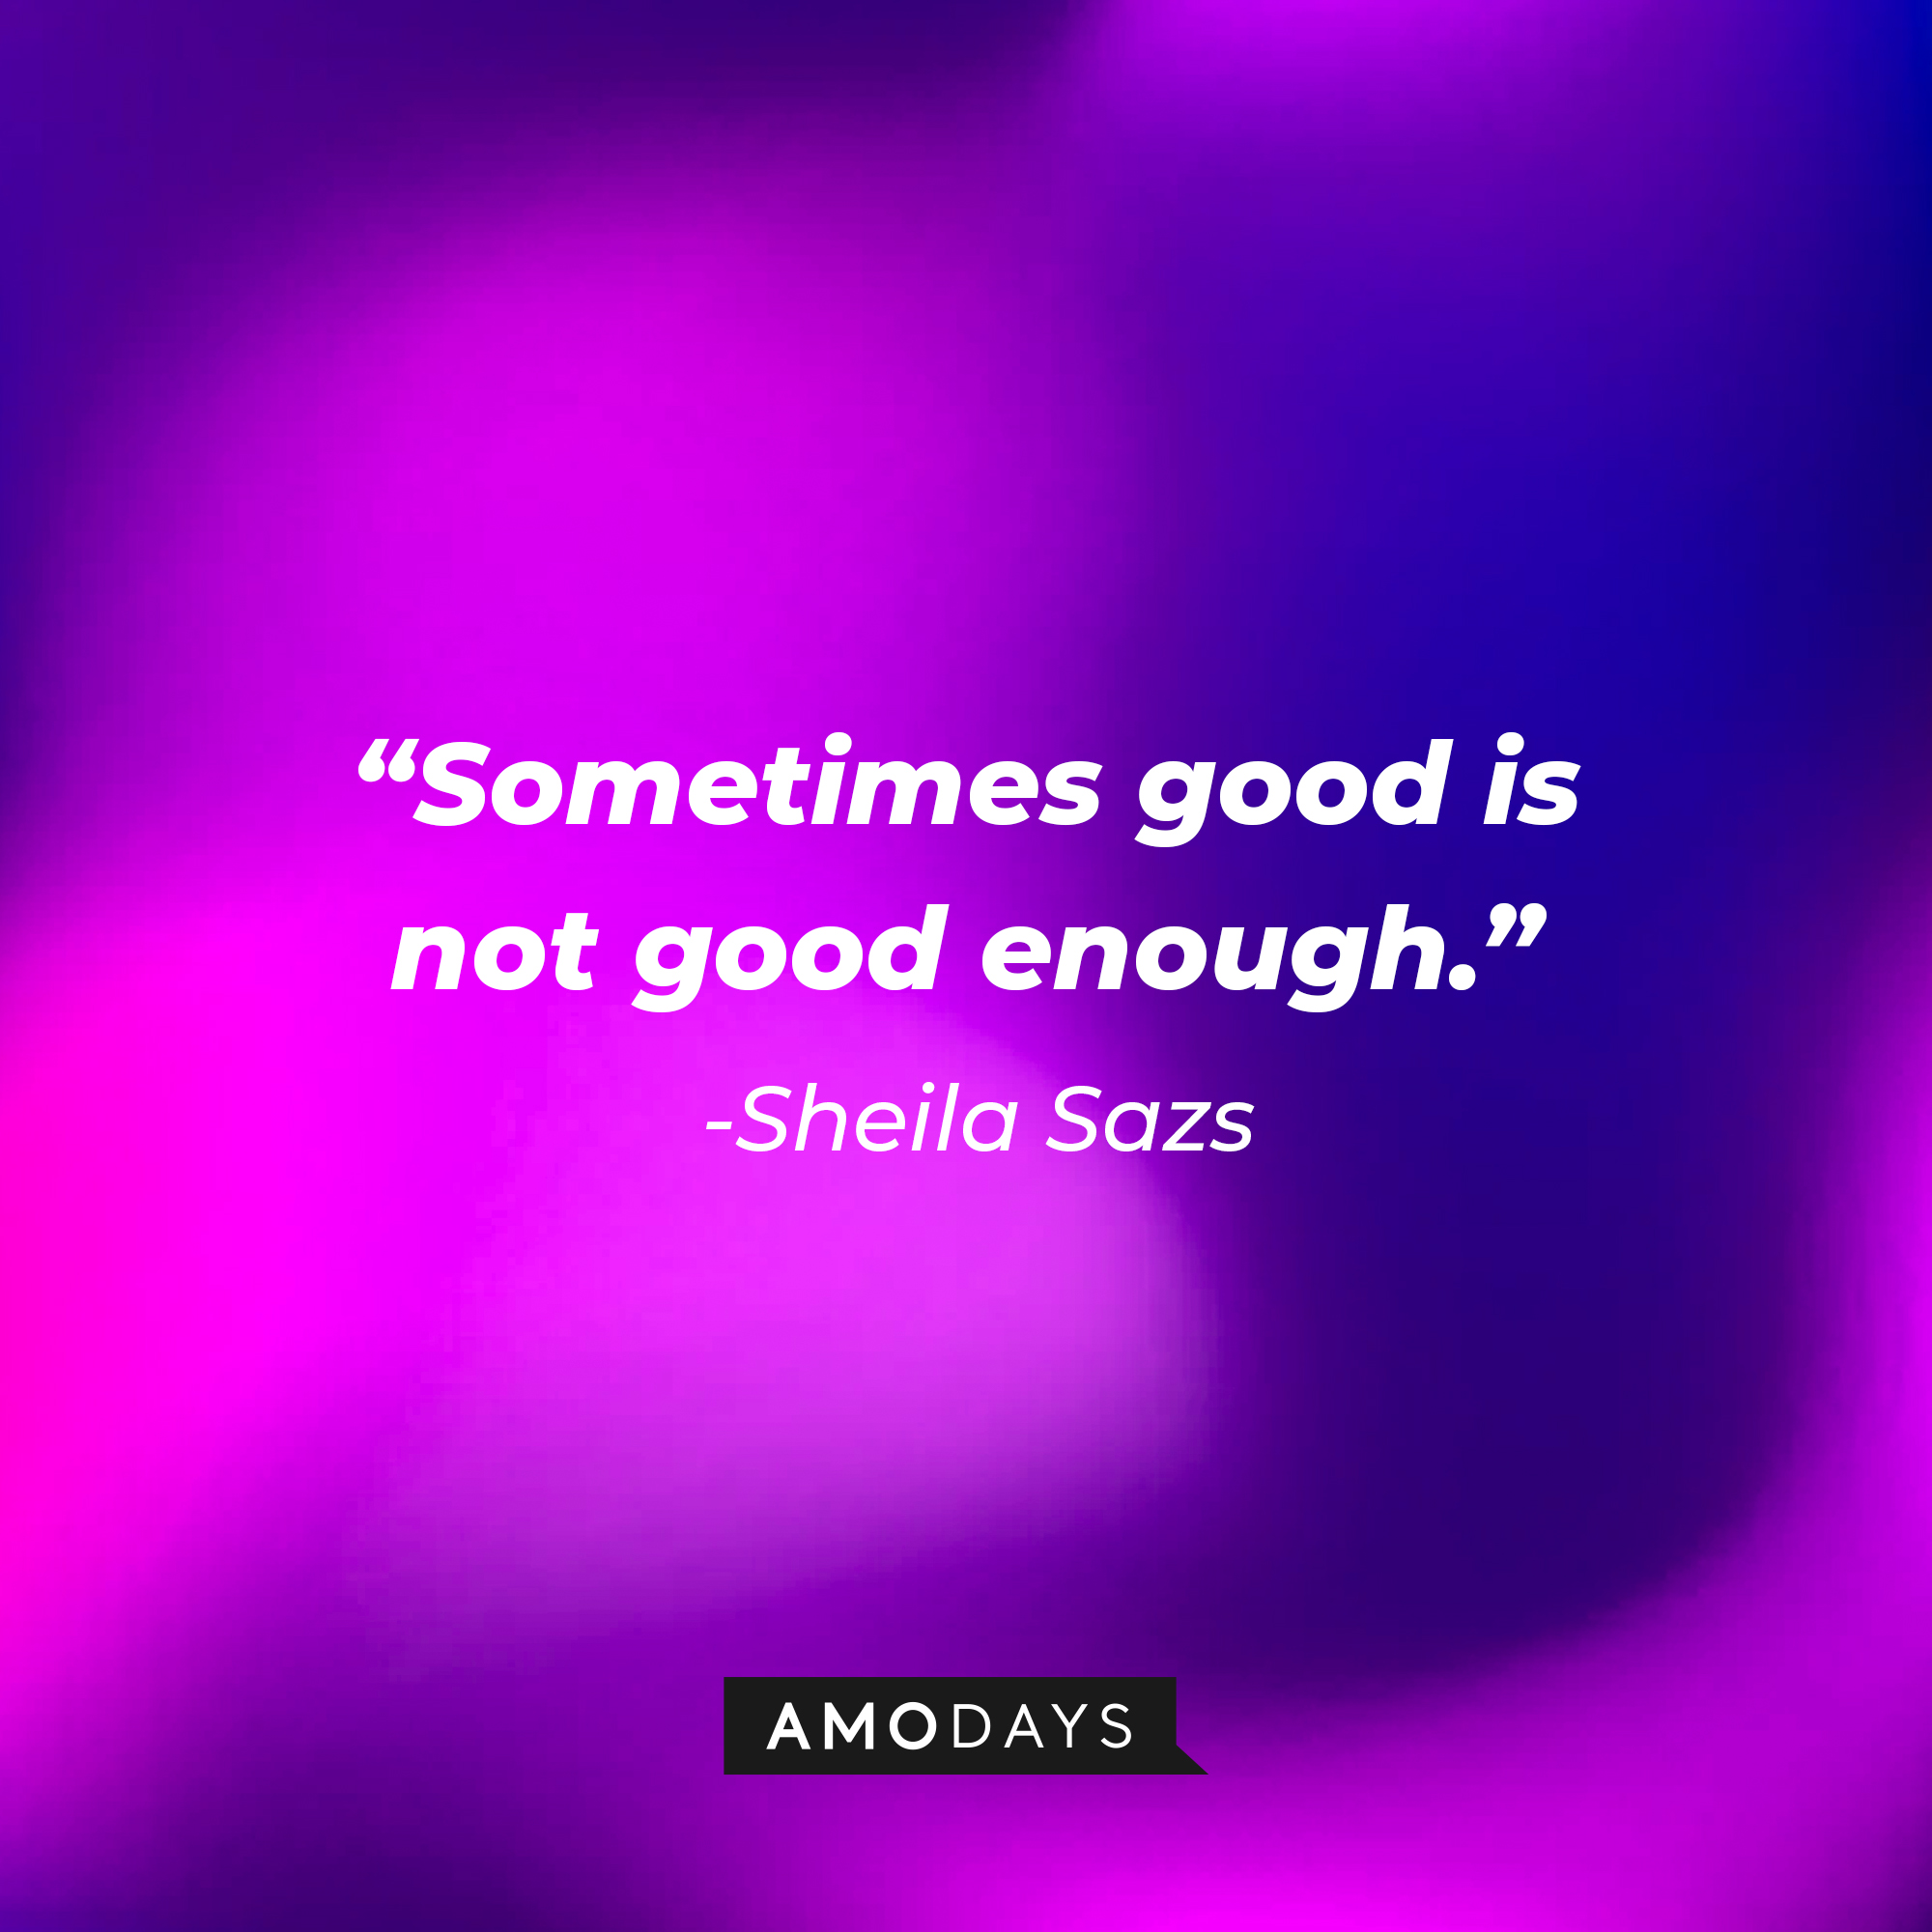 Sheila Sazs' quote from "Suits" : "Sometimes good is not good enough." | Source: Amodays